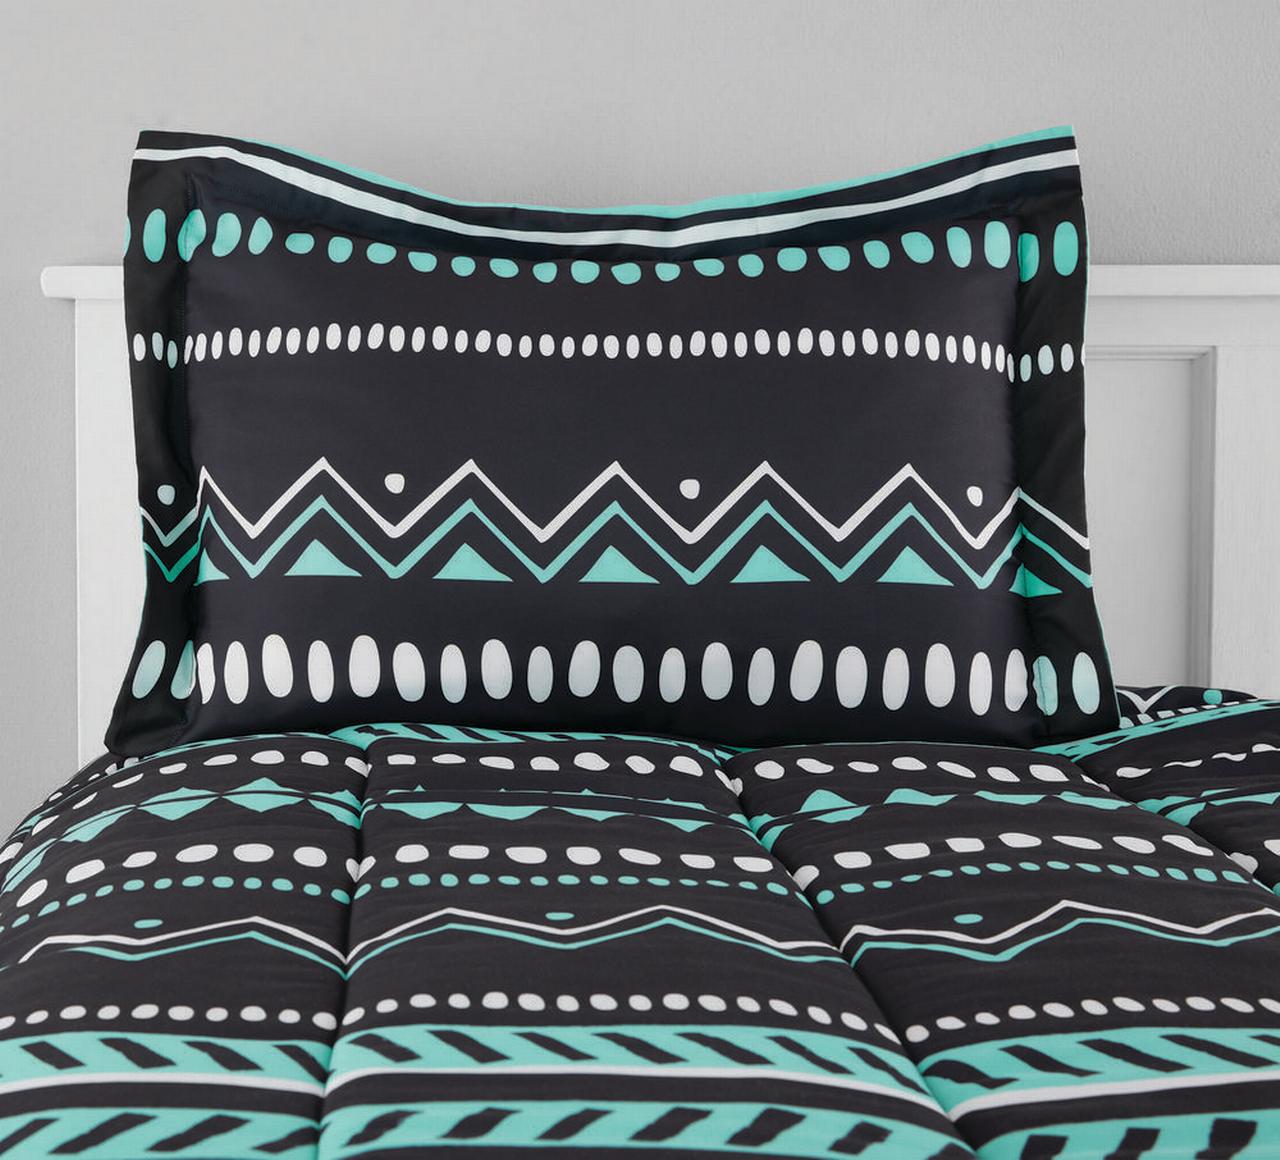 Your Zone Mint Gray Tribal 2 Piece Comforter and Sham Set Twin/XL - image 3 of 5